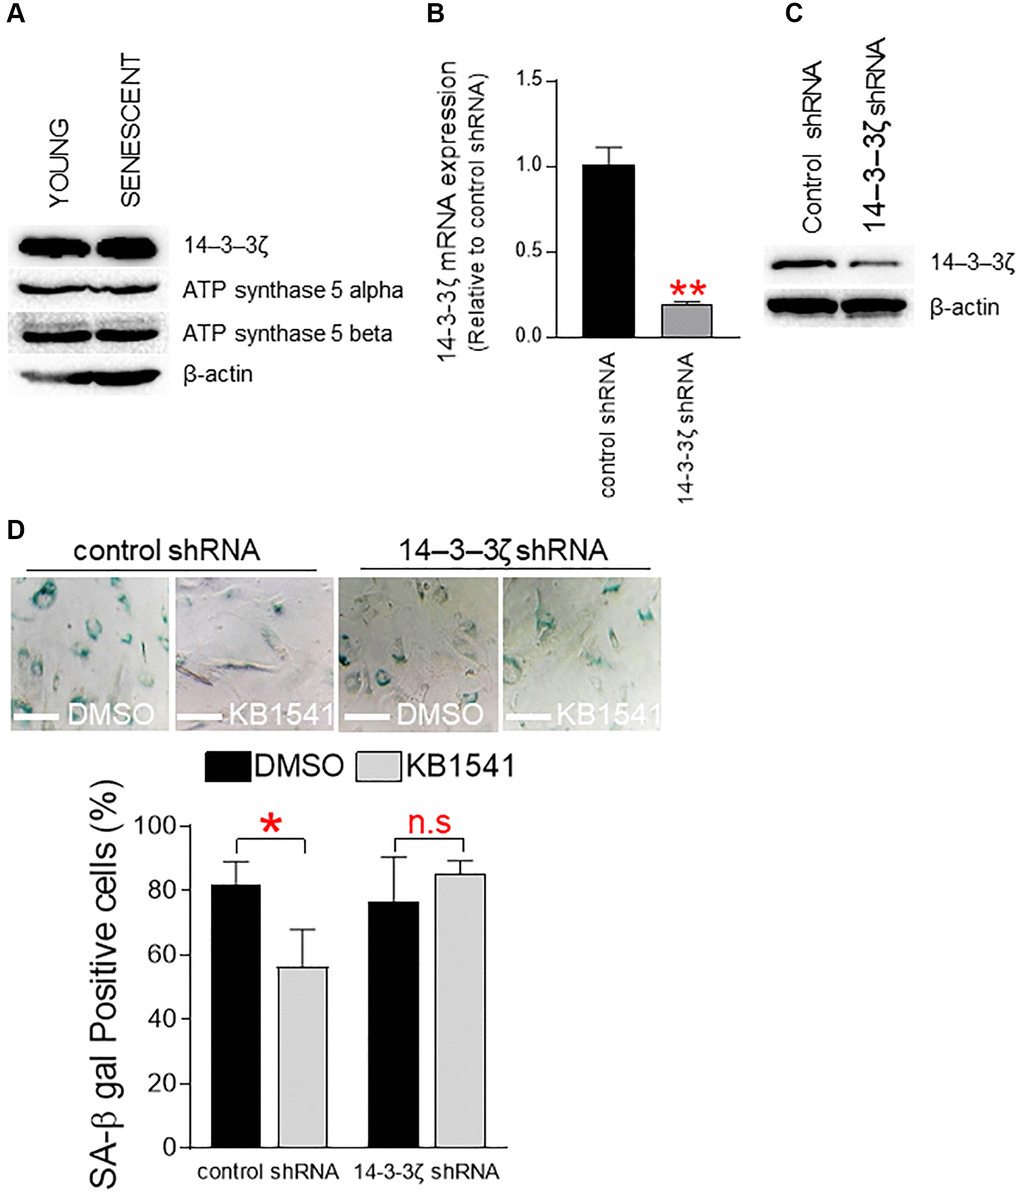 Maintenance of 14–3–3ζ expression is a prerequisite for KB1541-mediated senescence alleviation. (A) Expression levels of 14–3–3ζ and ATP synthase 5 alpha/beta proteins in young and senescent fibroblasts. (B) shRNA-mediated 14–3–3ζ knockdown significantly reduced the endogenous expression level of 14–3–3ζ mRNA. **P t-test. Mean ± S.D., n = 3. (C) Immunoblot of total lysates from senescent cells transduced with lenti-virus expressing control shRNA or 14–3–3ζ shRNA. (D) Quantification of SA-β gal positive cells. *P t-test. Mean ± S.D., n = 3.